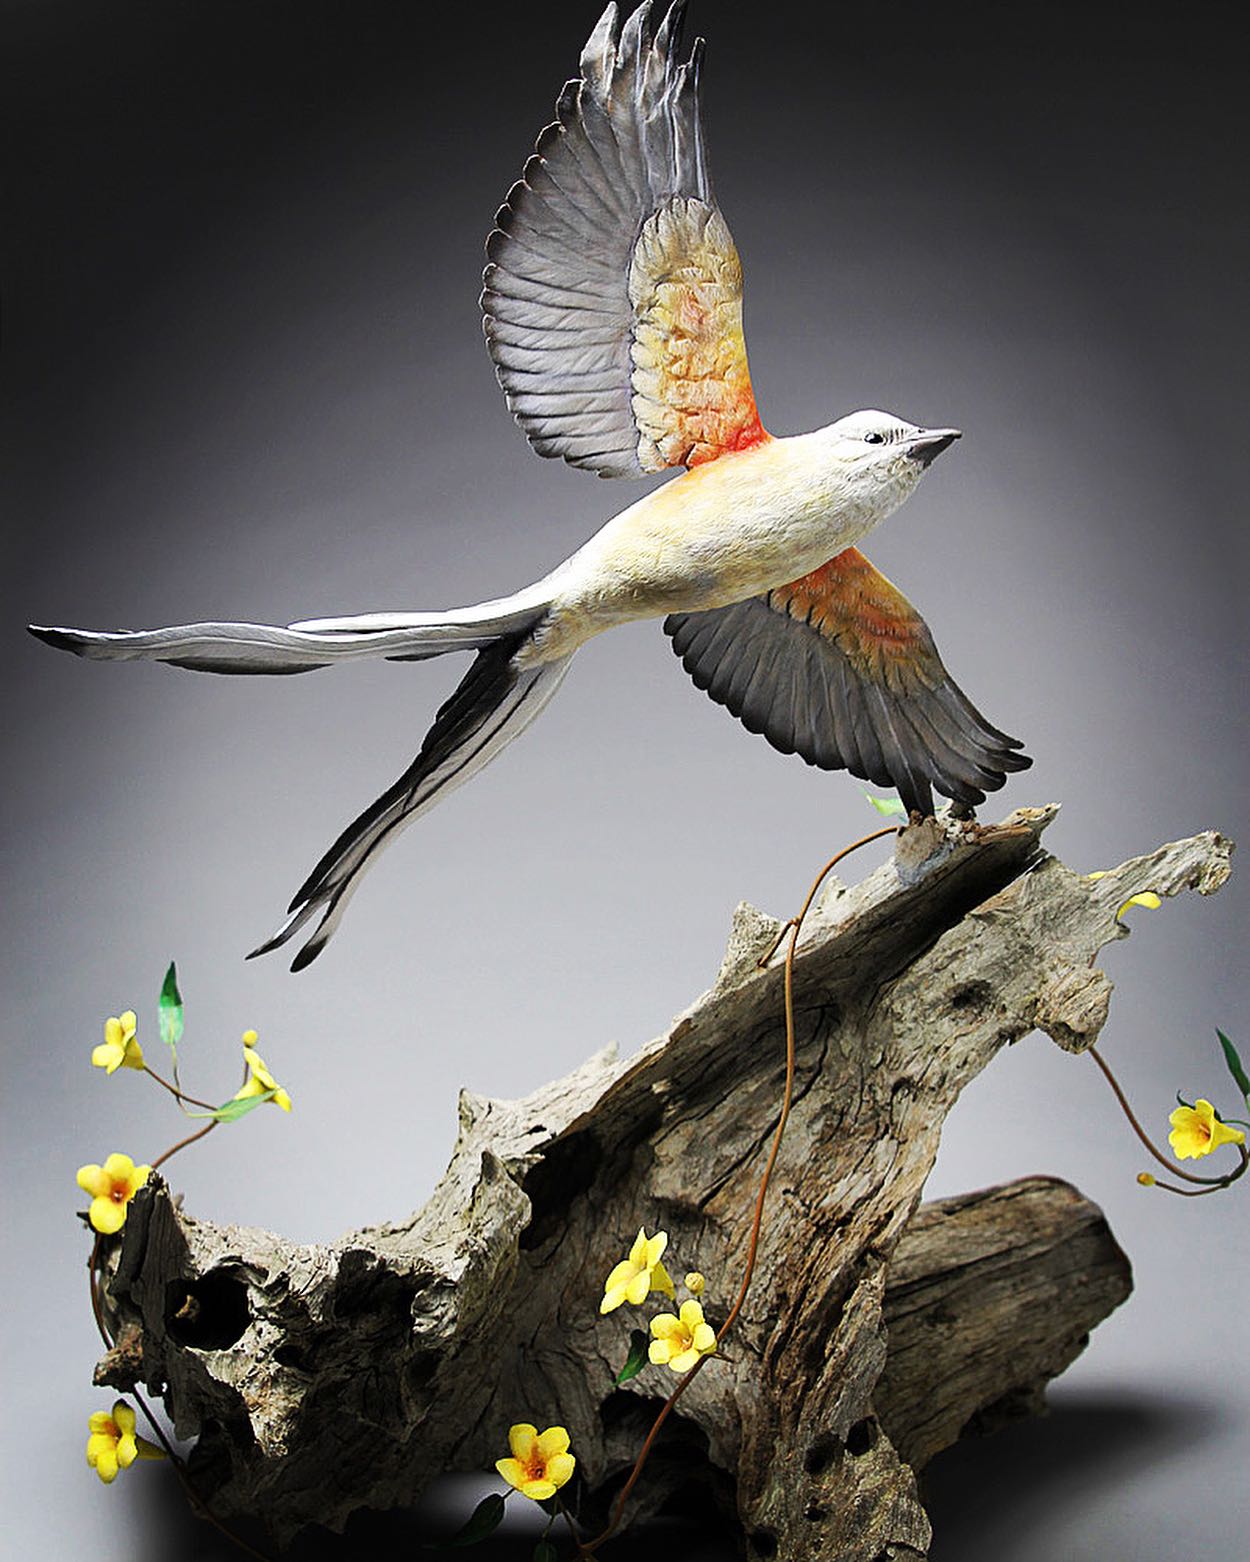 From Branch To Breathtaking, The Art Of Chris Wilson's Wildlife Sculptures (19)